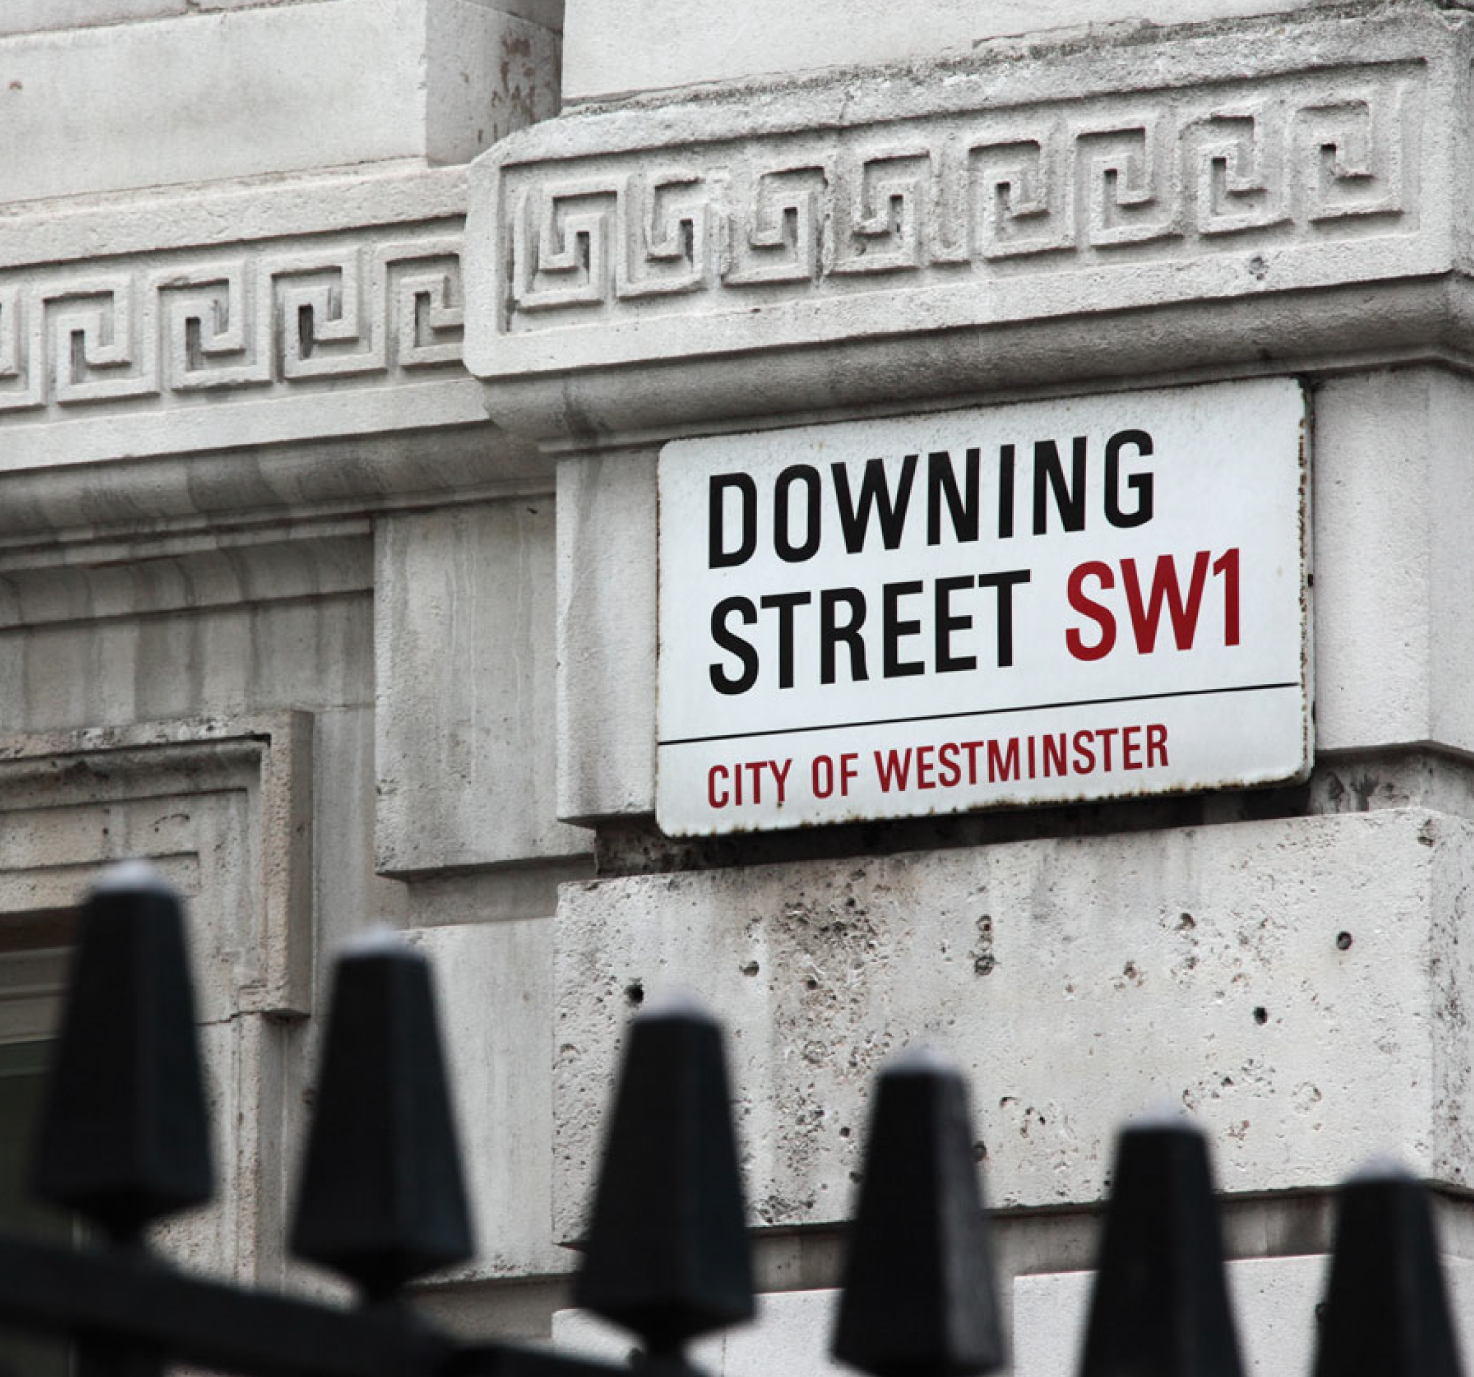 Picture of street sign for Downing Street